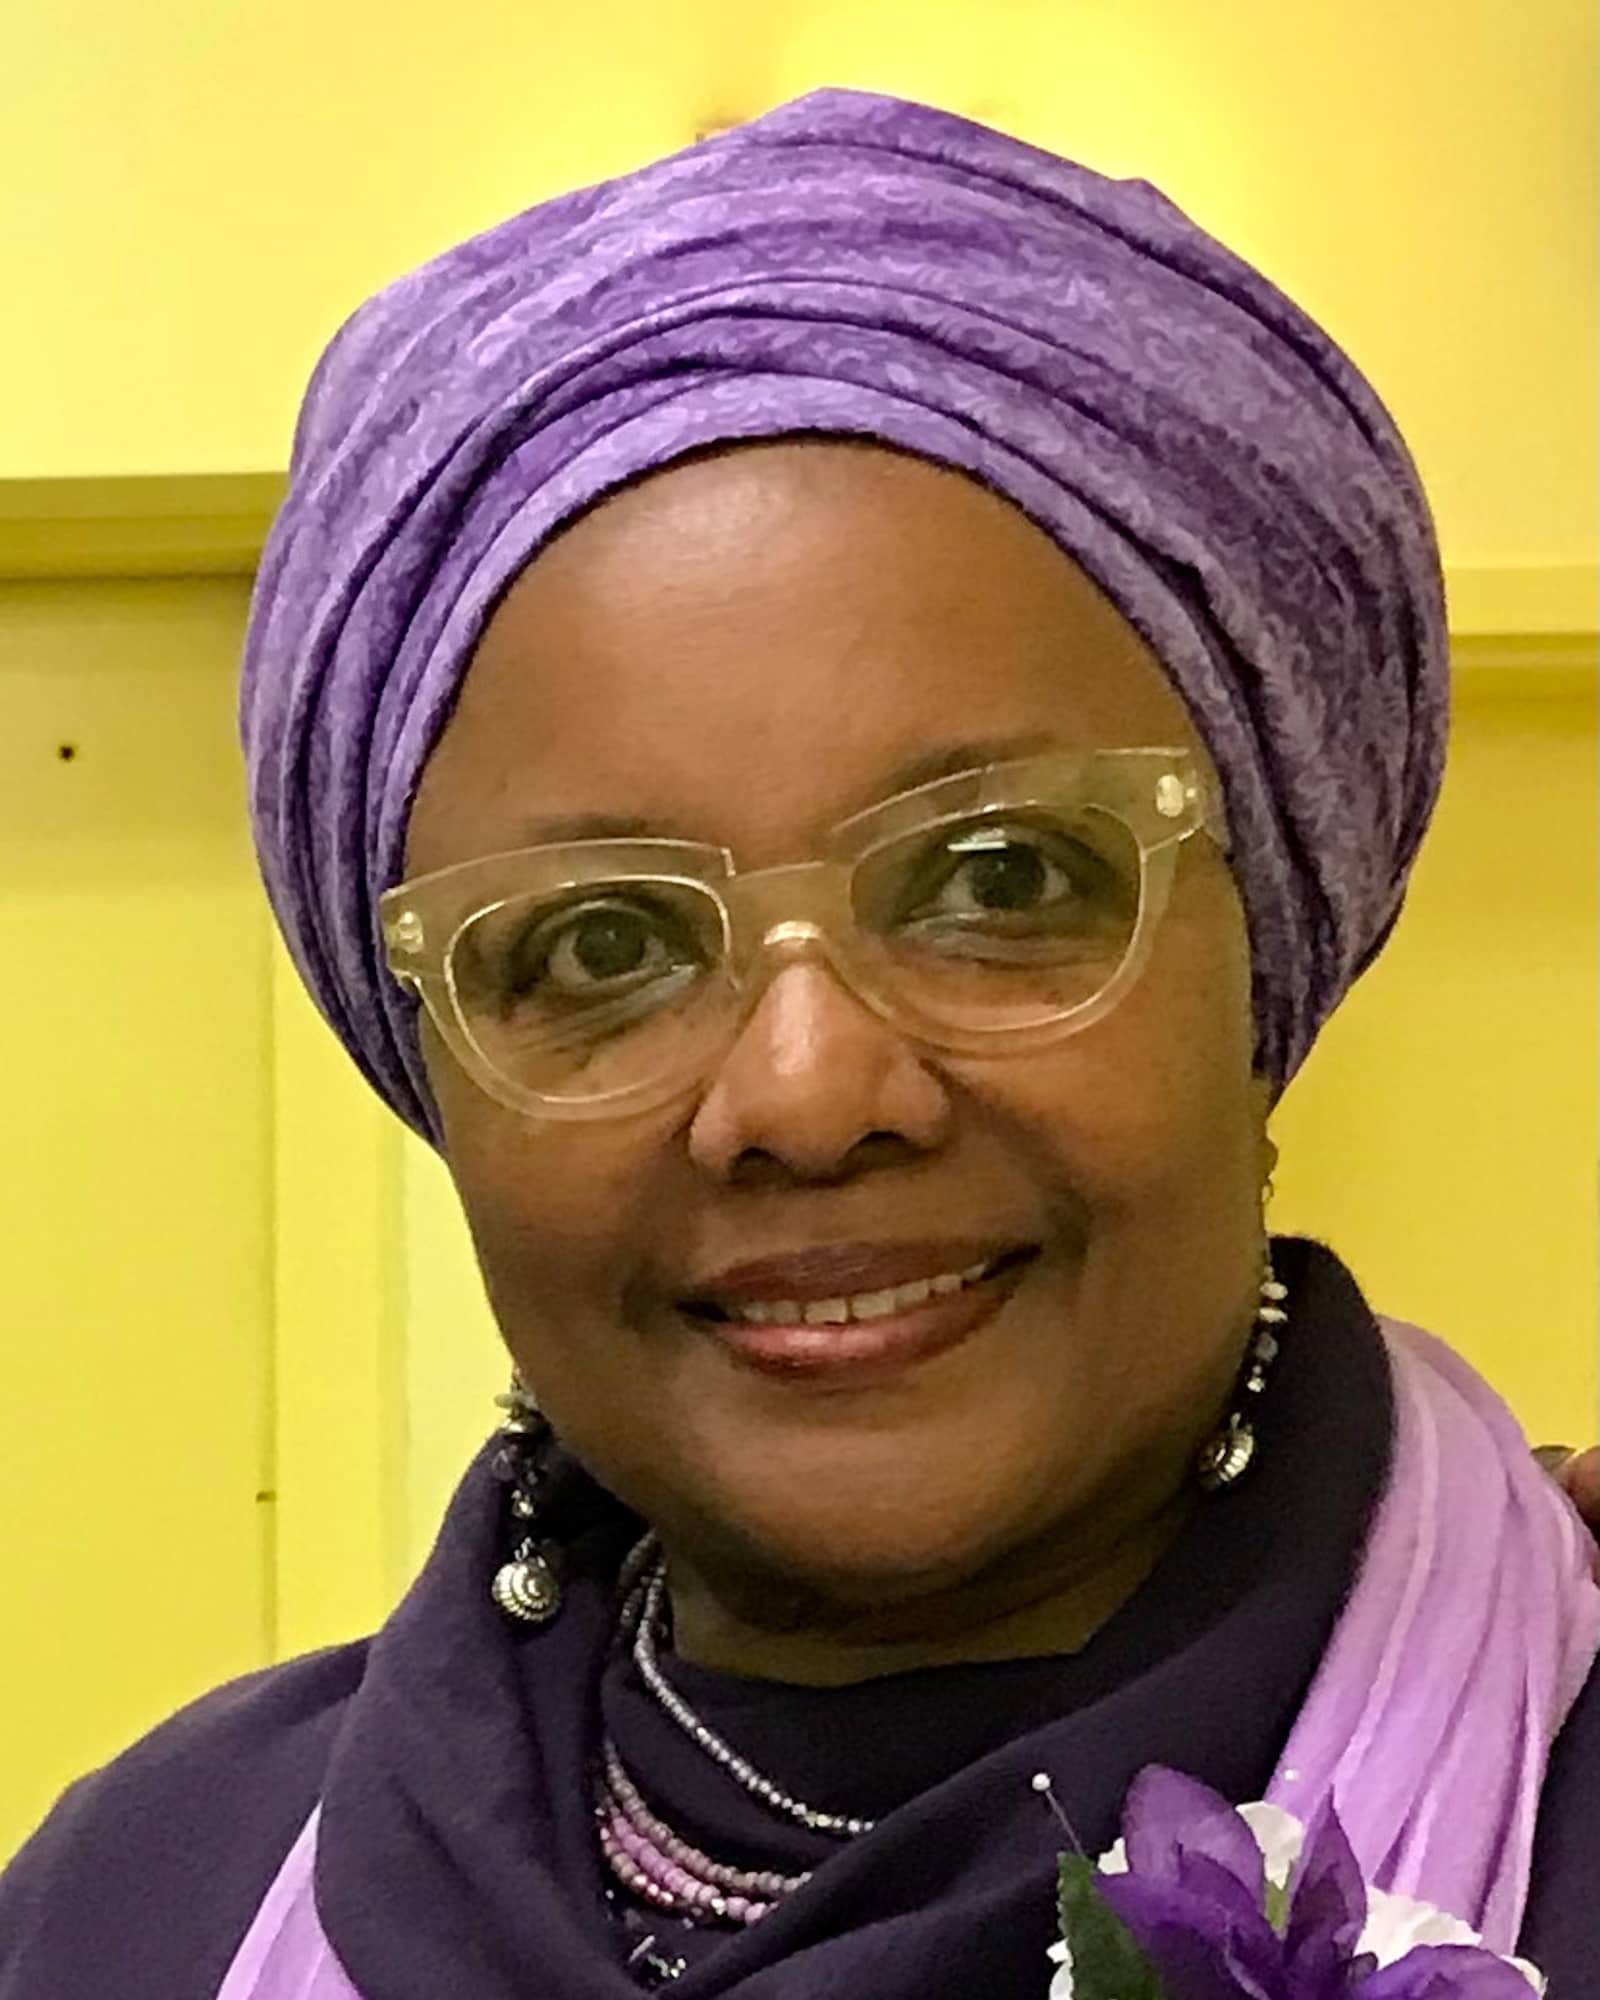 A person wearing a purple head covering, glasses, and a purple scarf smiles at the viewer.